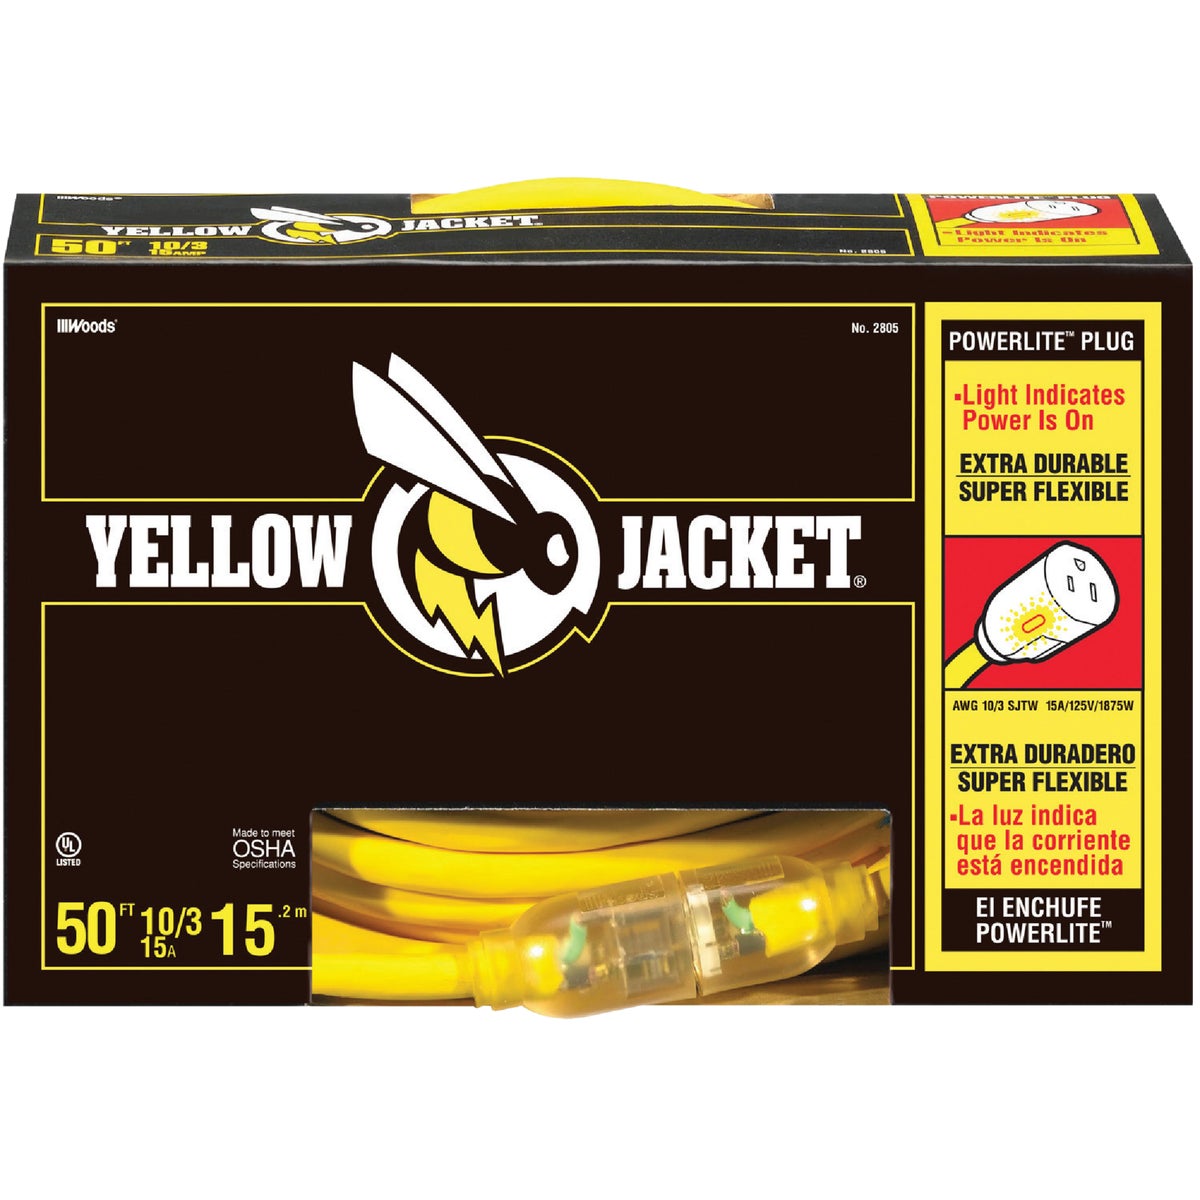 Item 536741, Yellow Jacket SJTW-A, high-gloss, extremely flexible power cord.